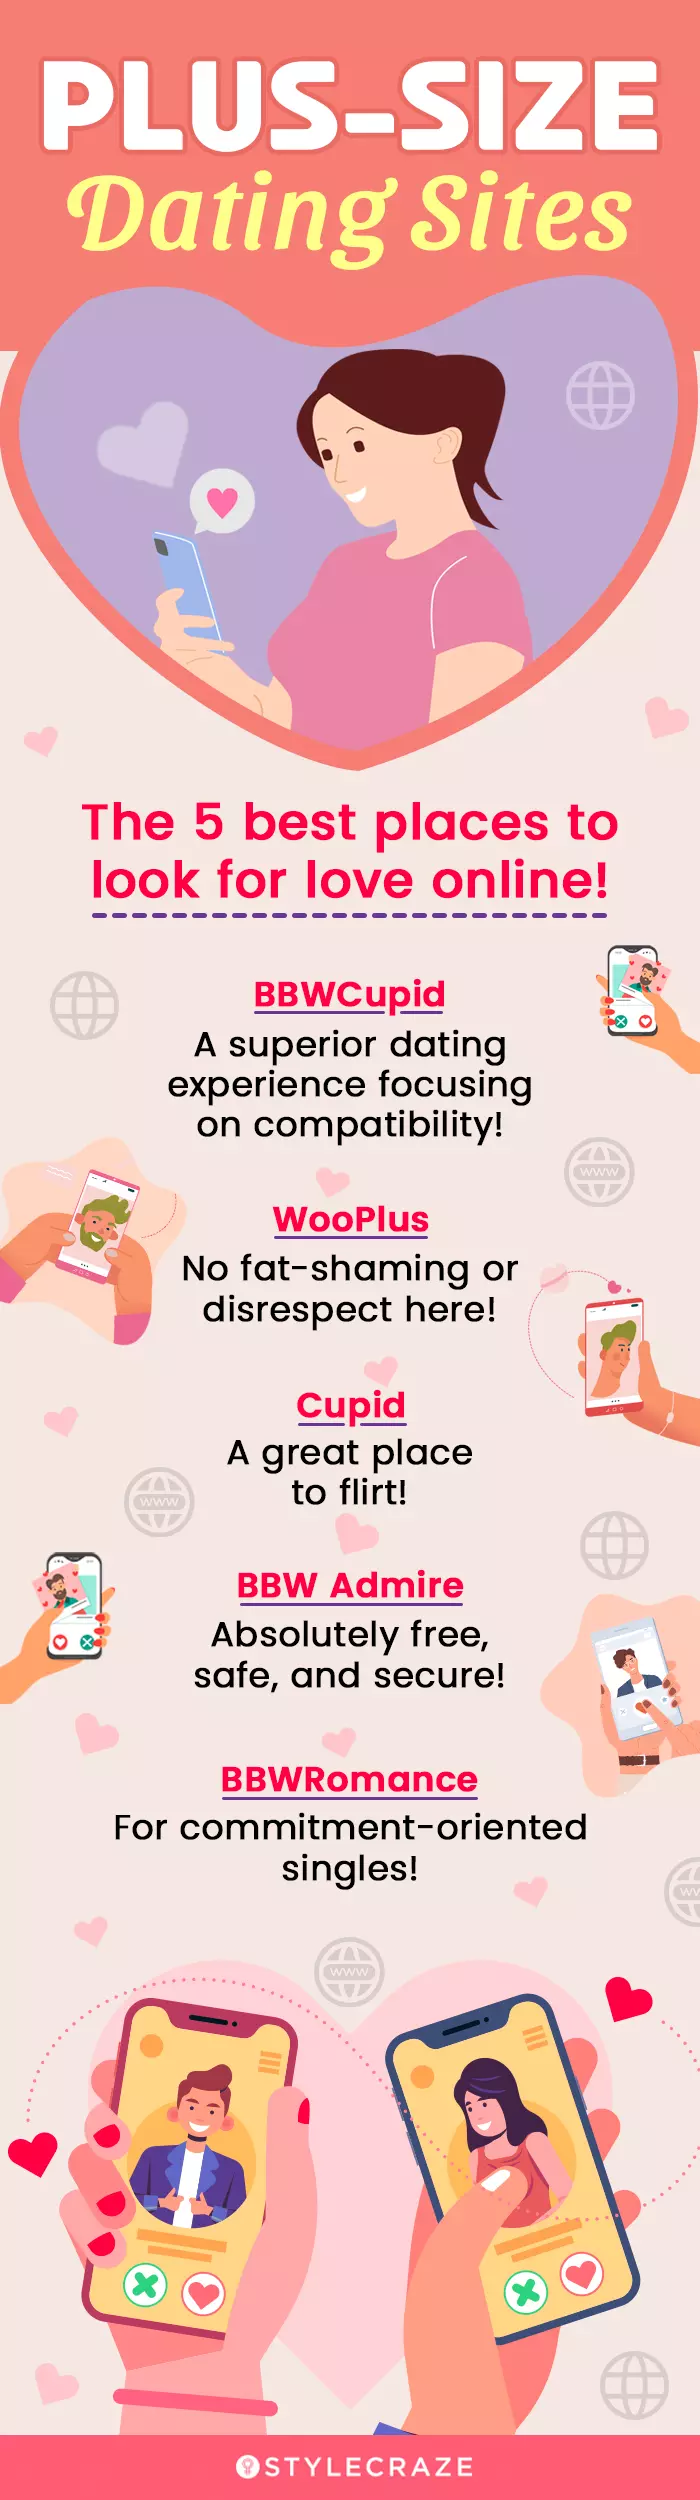 plus size dating sites (infographic)